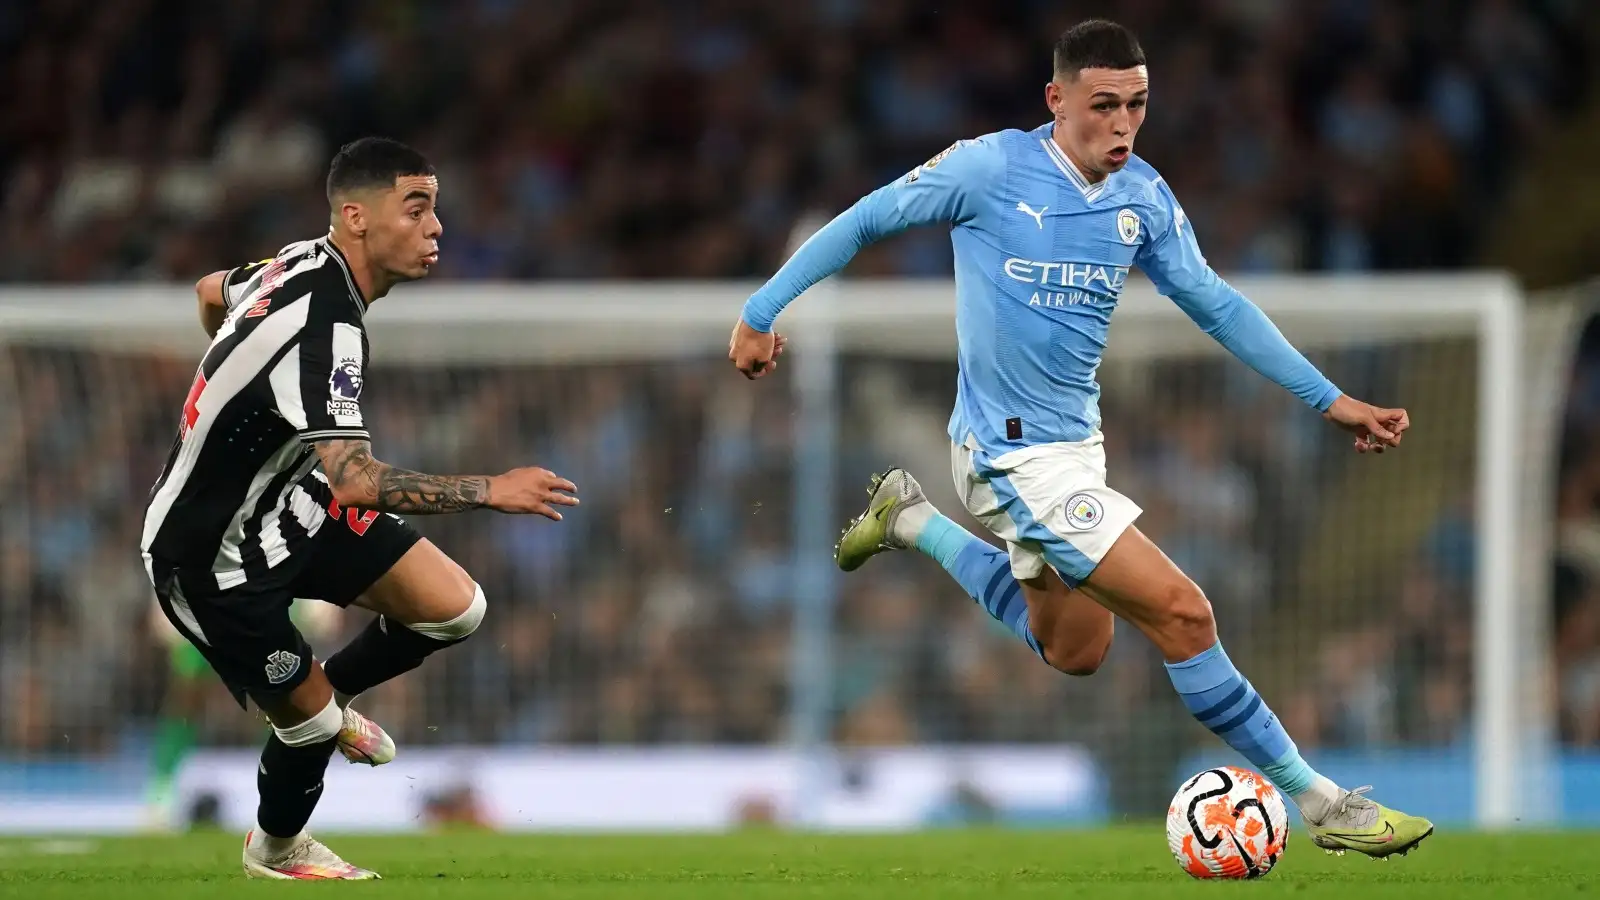 Man City's Phil Foden dribbles past Newcastle winger Miguel Almiron.